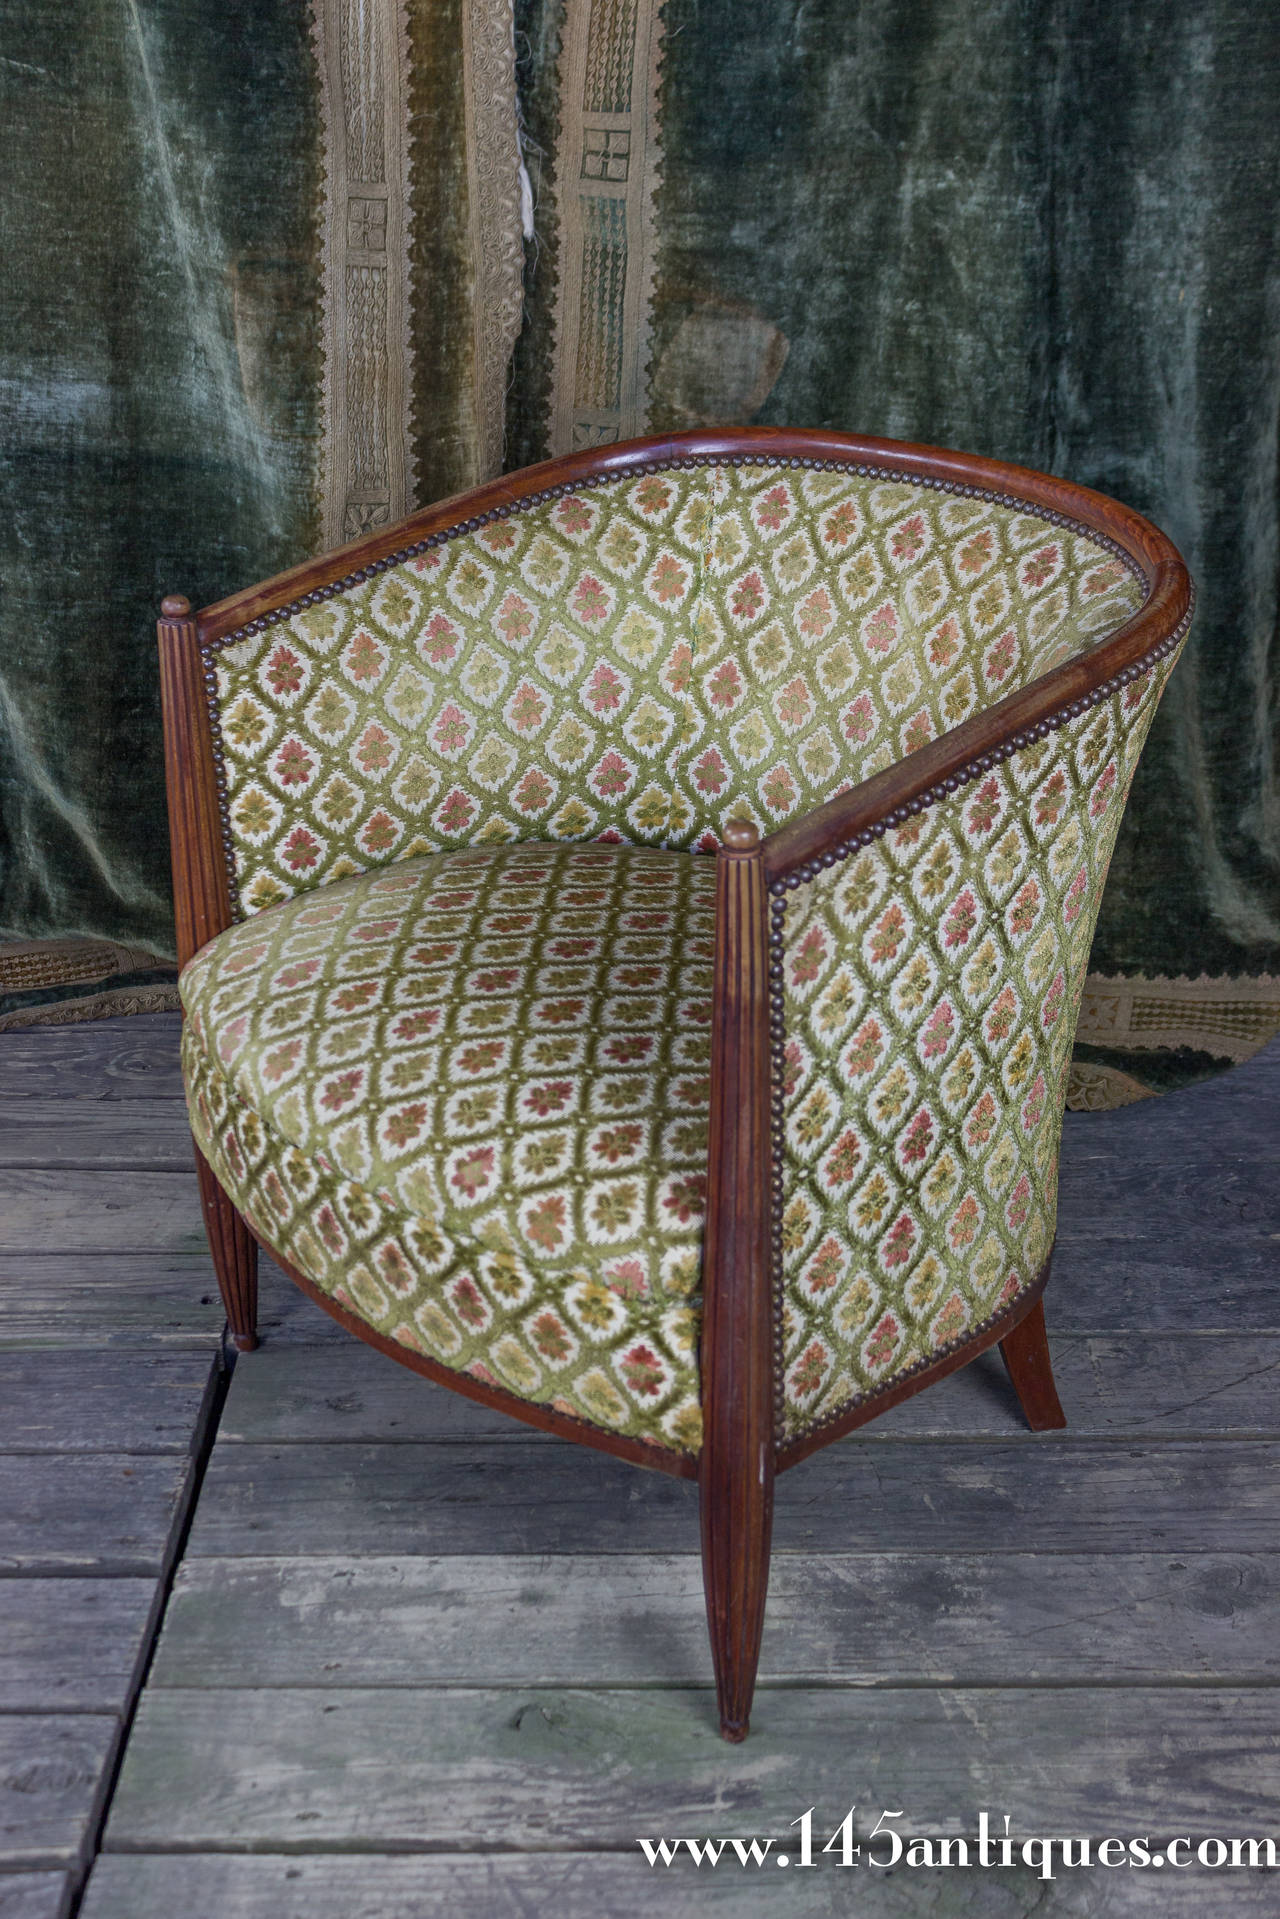 Pair of French Art Deco armchairs with curved back, fluted legs and a ball final detail. These chairs are part of a set that includes two side chairs (ST0215-07) and settee (ST0215-05), all of the set is sold separately. This pair is in good